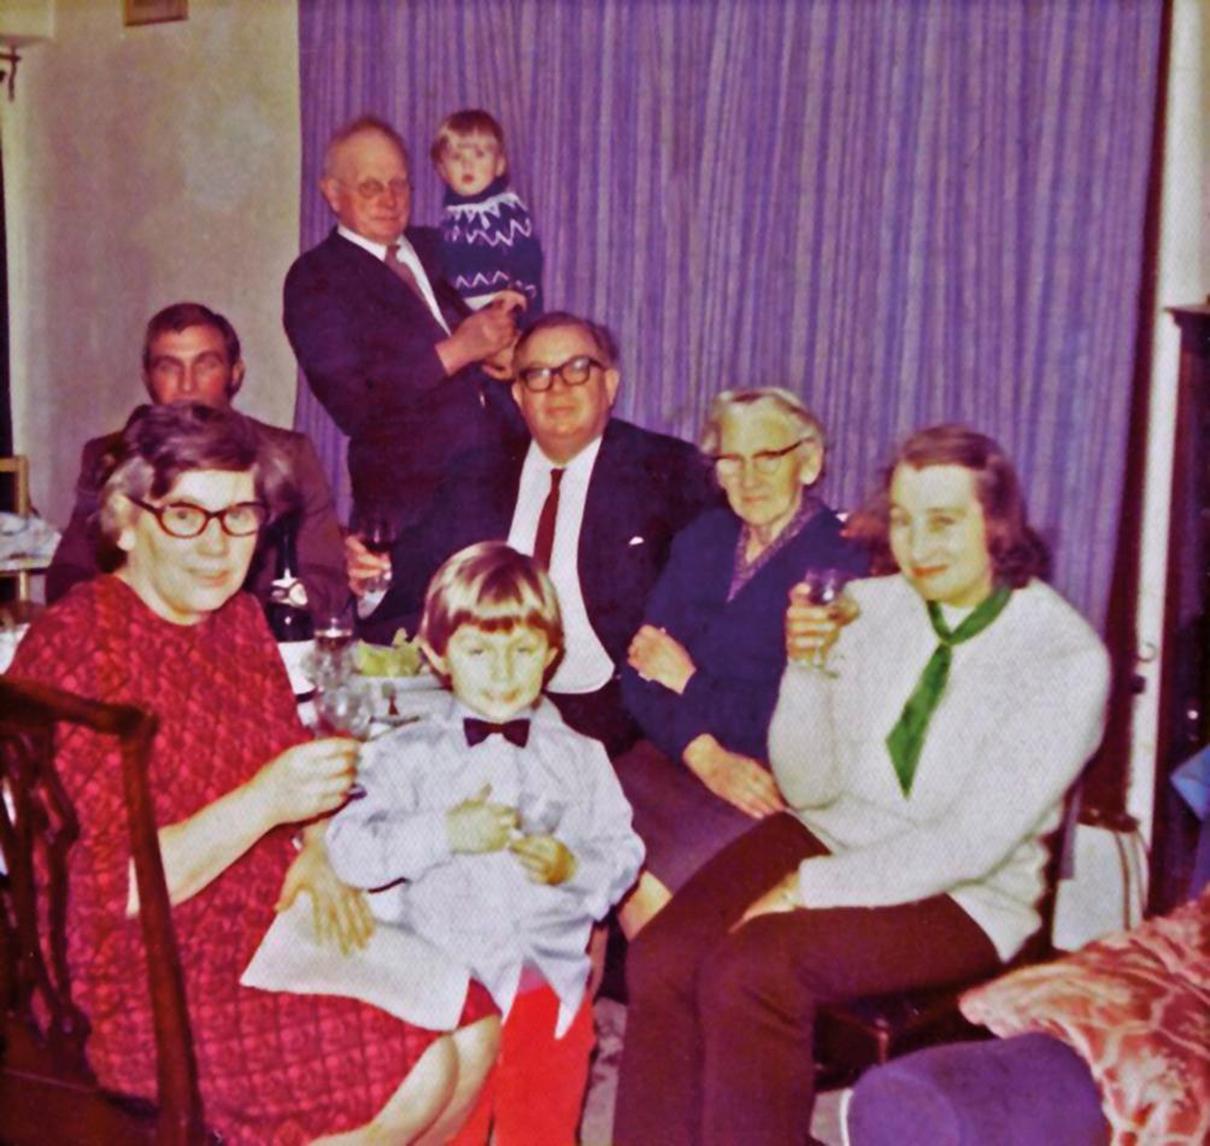  Oldfield enjoys a family Christmas in 1975 during his period as head of MI6